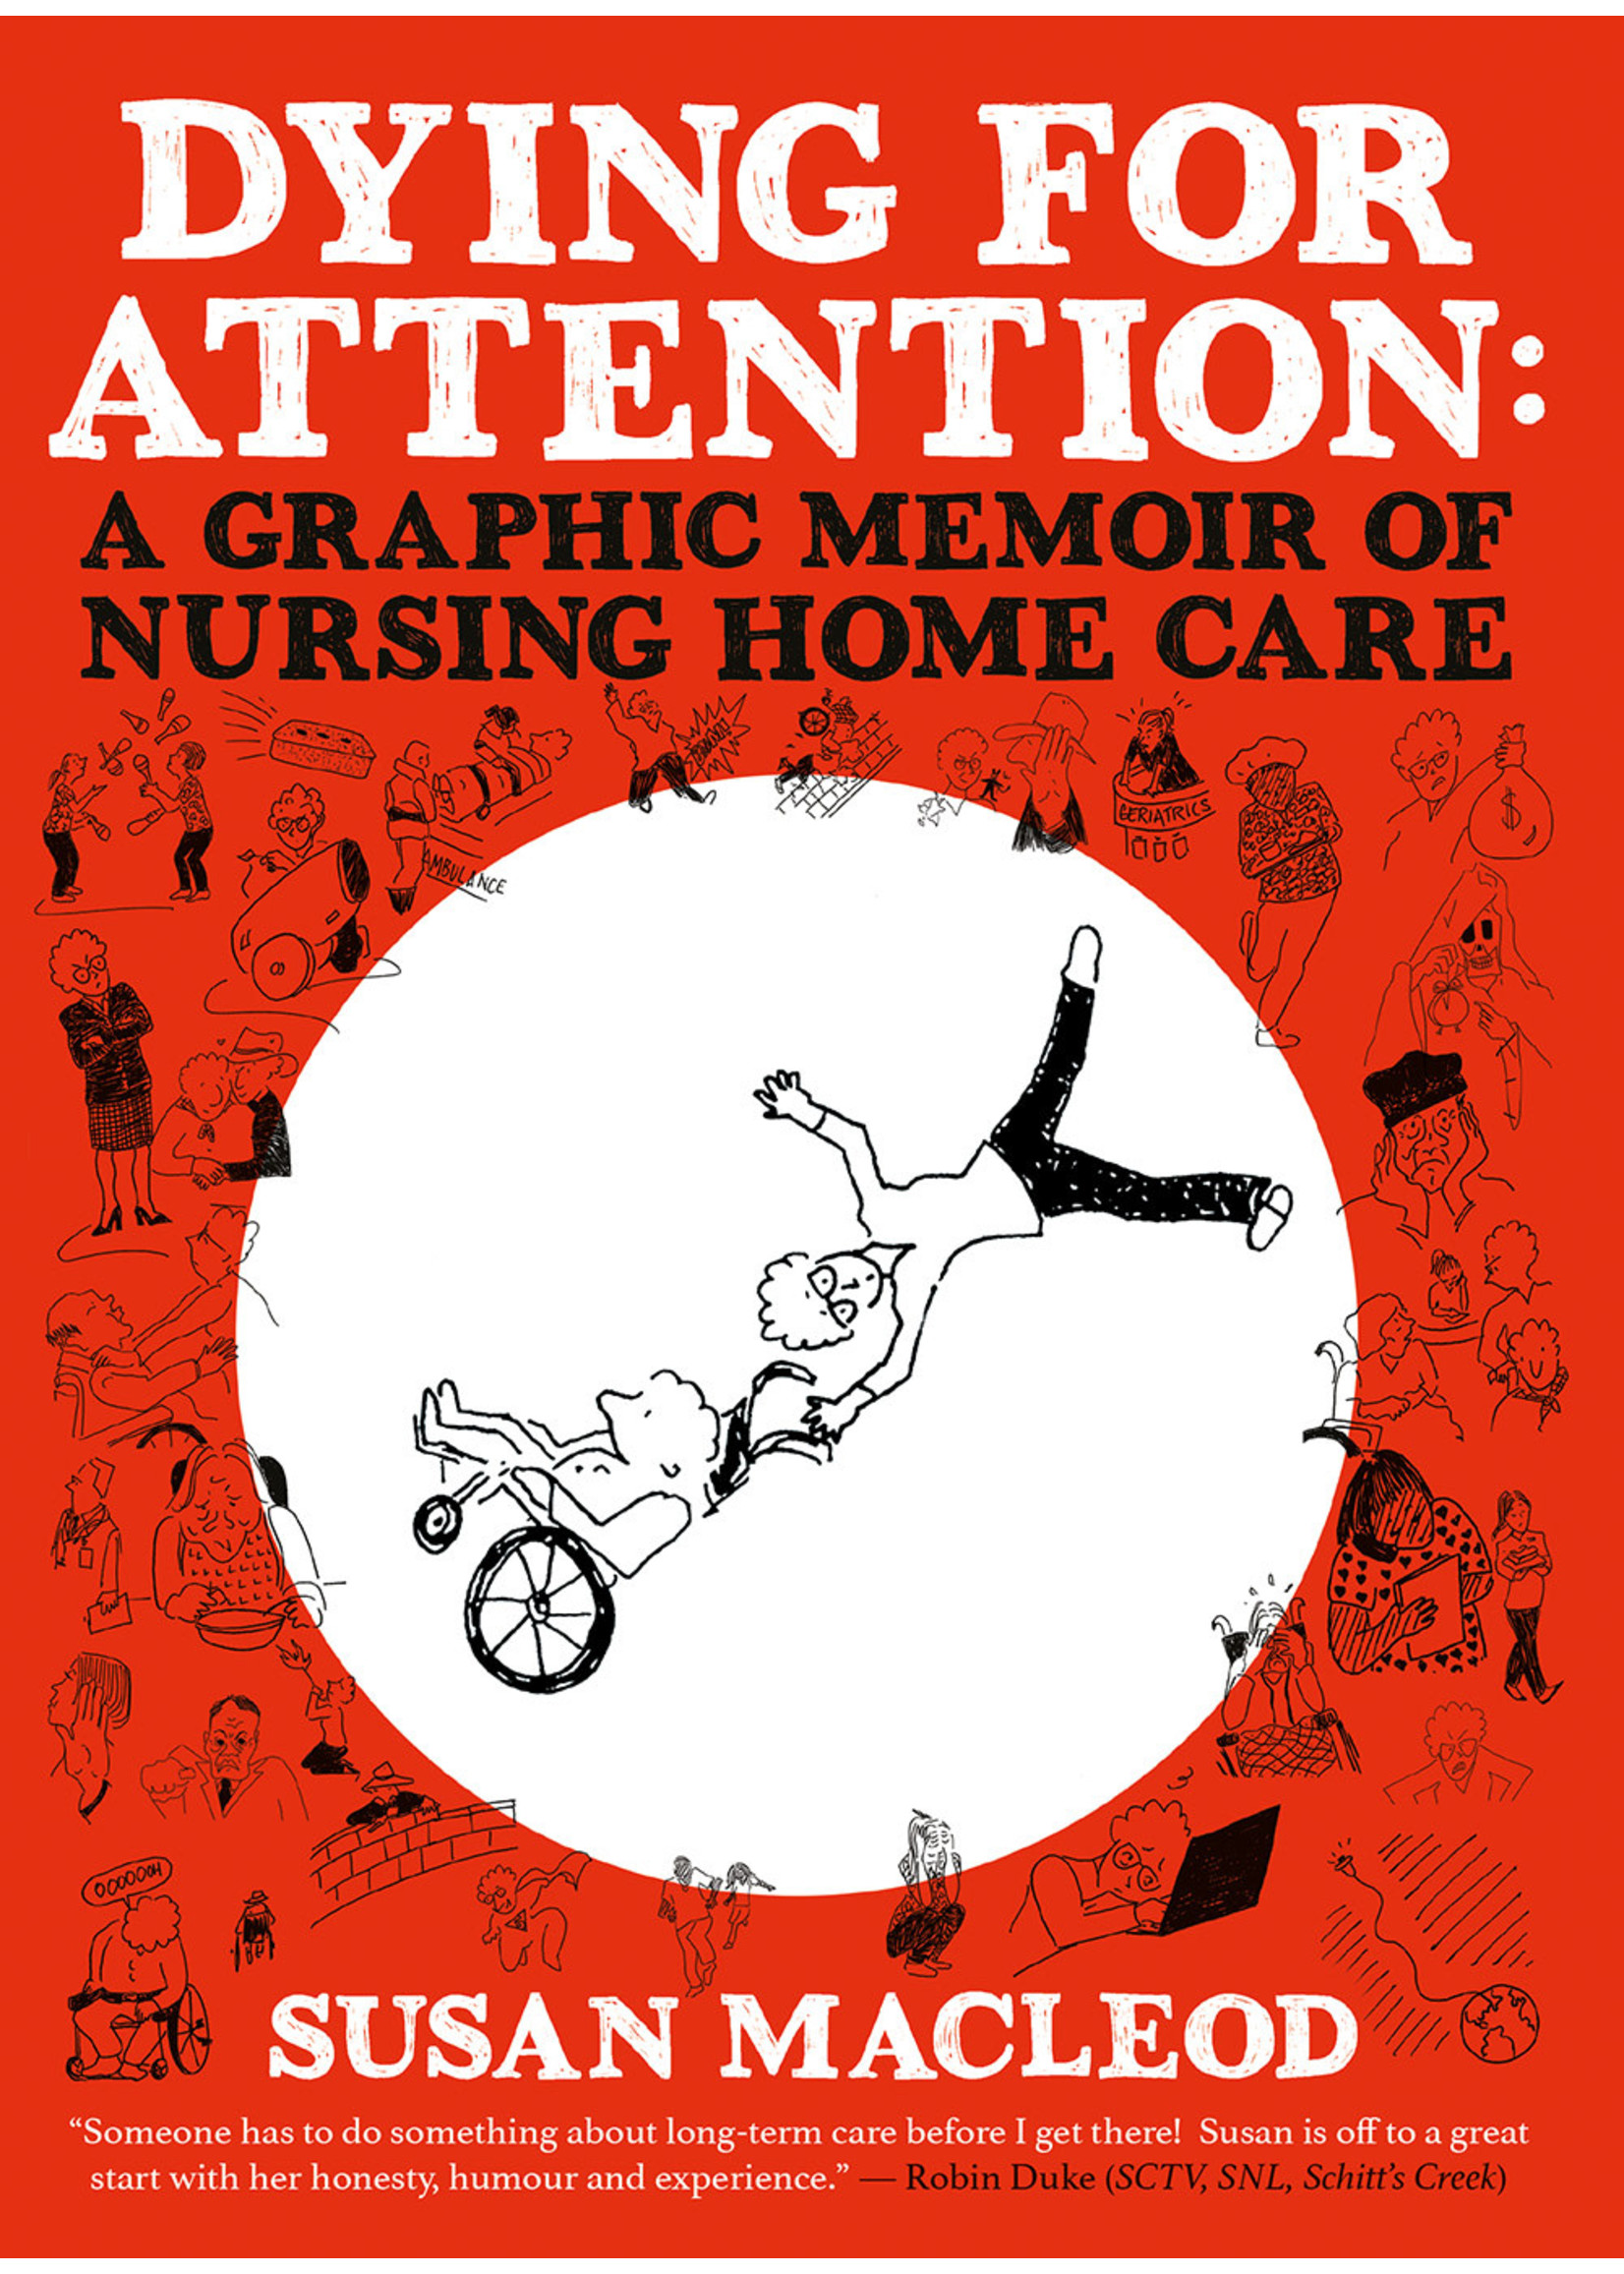 Dying for AttentionA Graphic Memoir of Nursing Home Care by Susan MacLeod